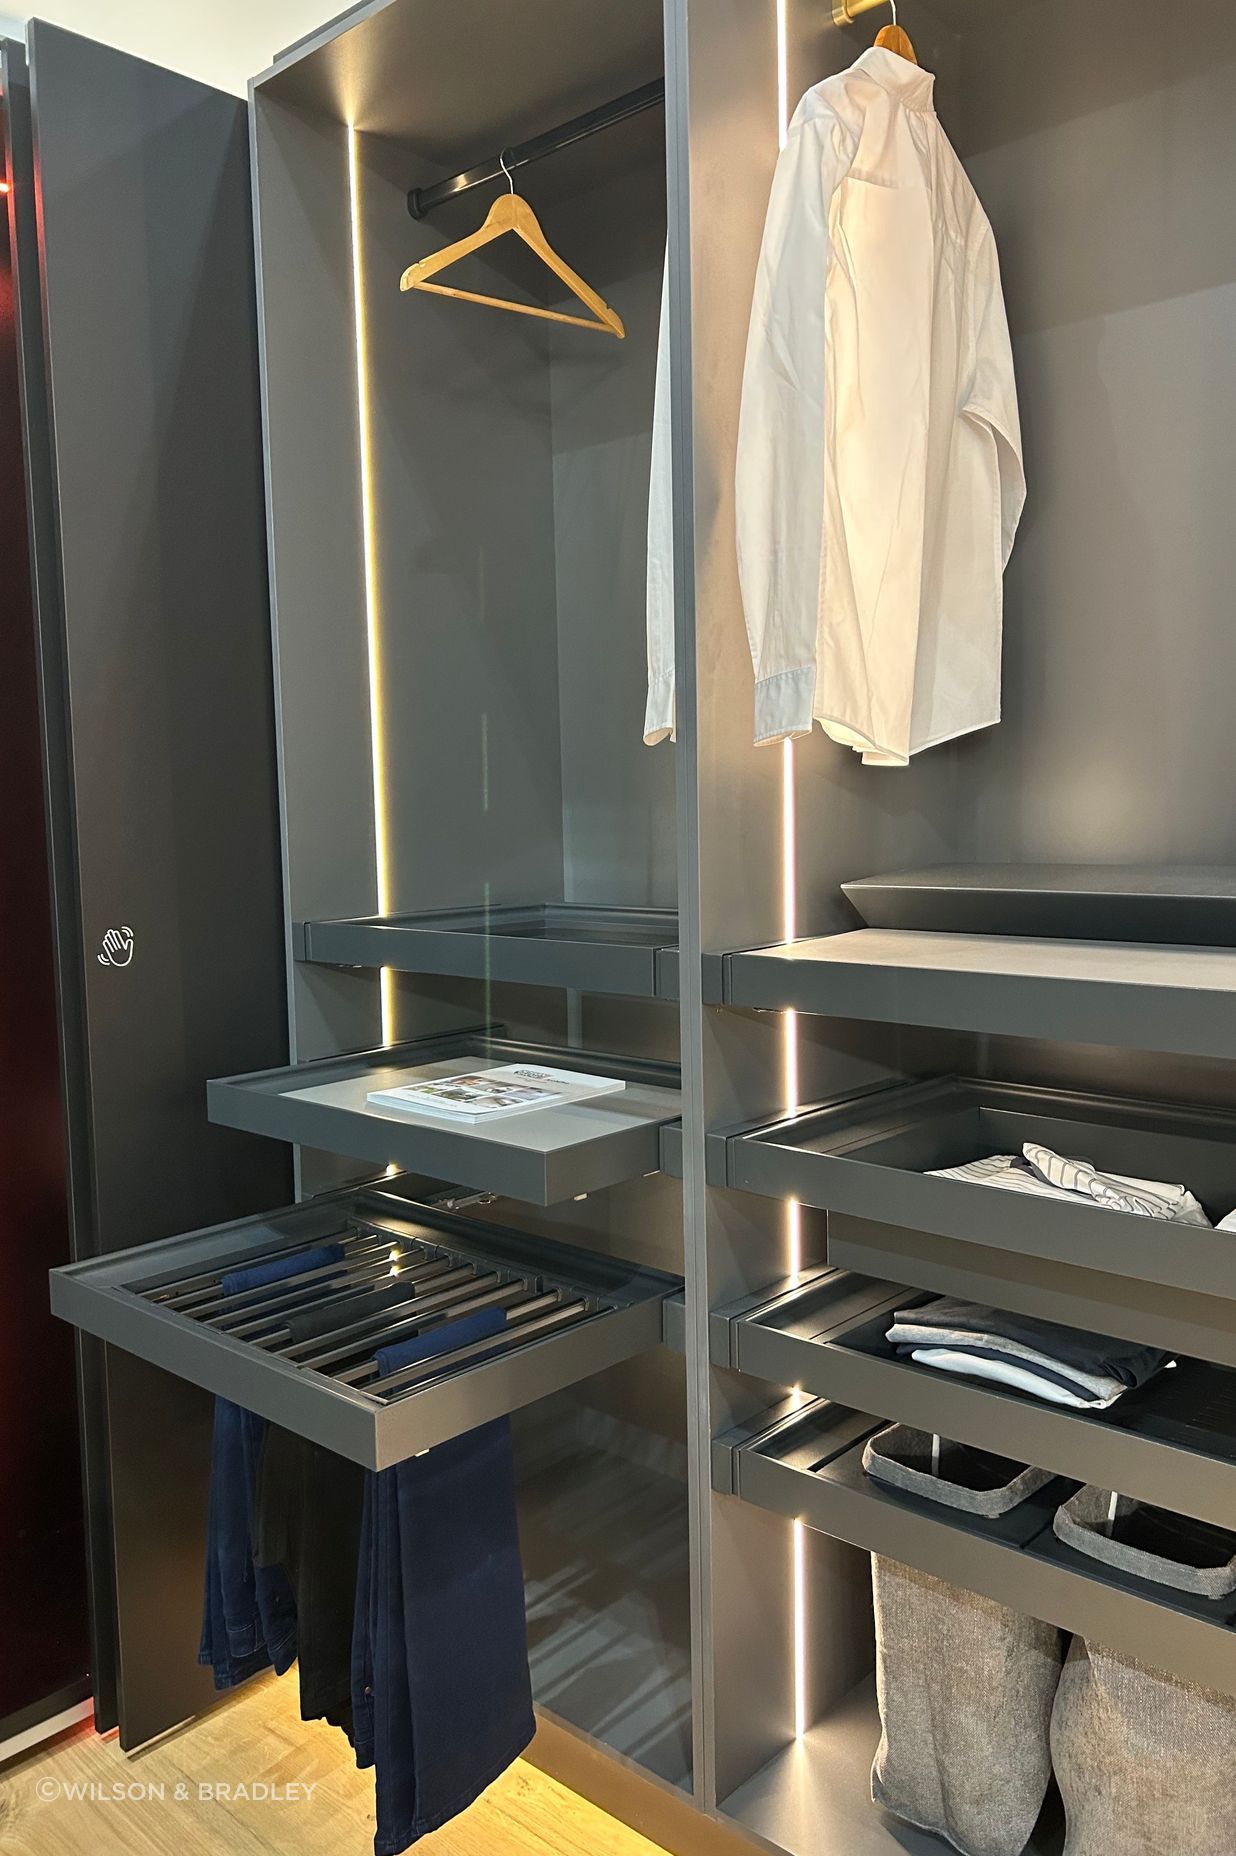 The SIGE Kaos Wardrobe System keeps your closet organised and prevents clutter.